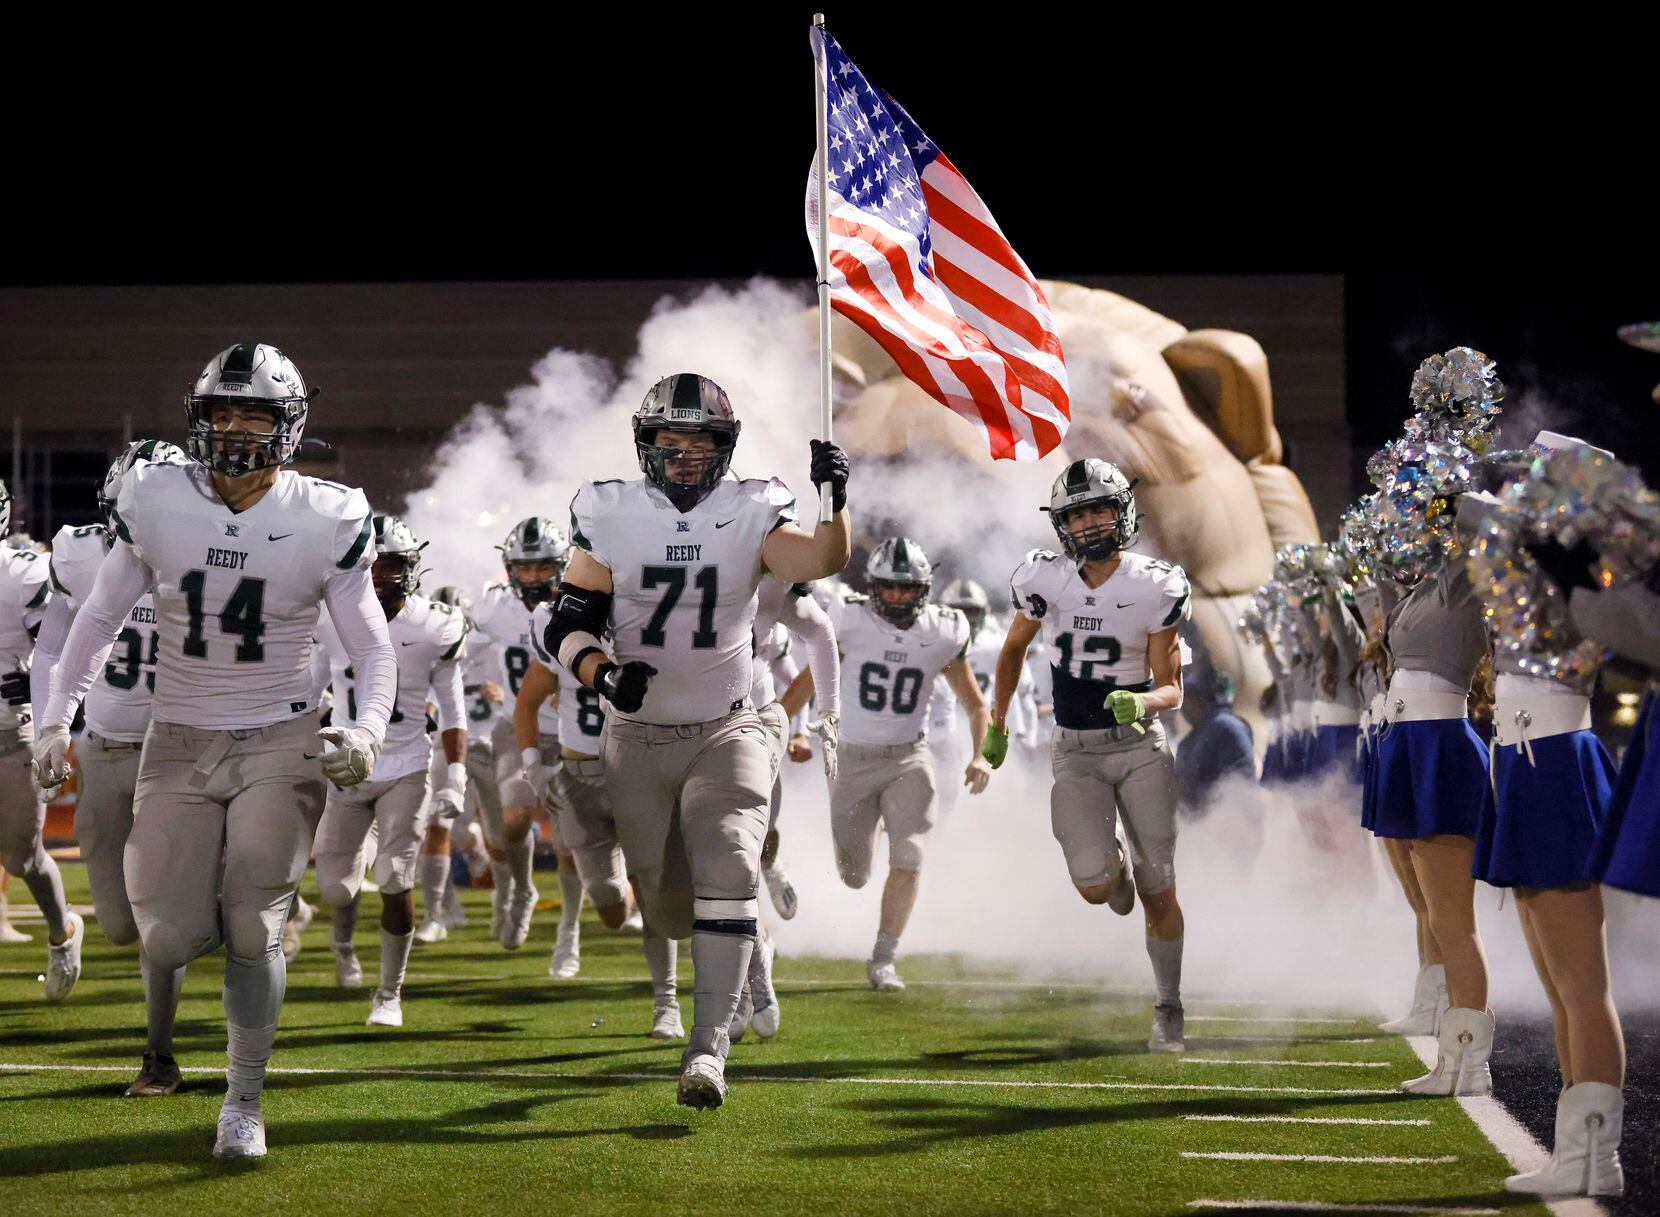 The Frisco Reedy football team runs onto the field to face Lancaster in their Class 5A...